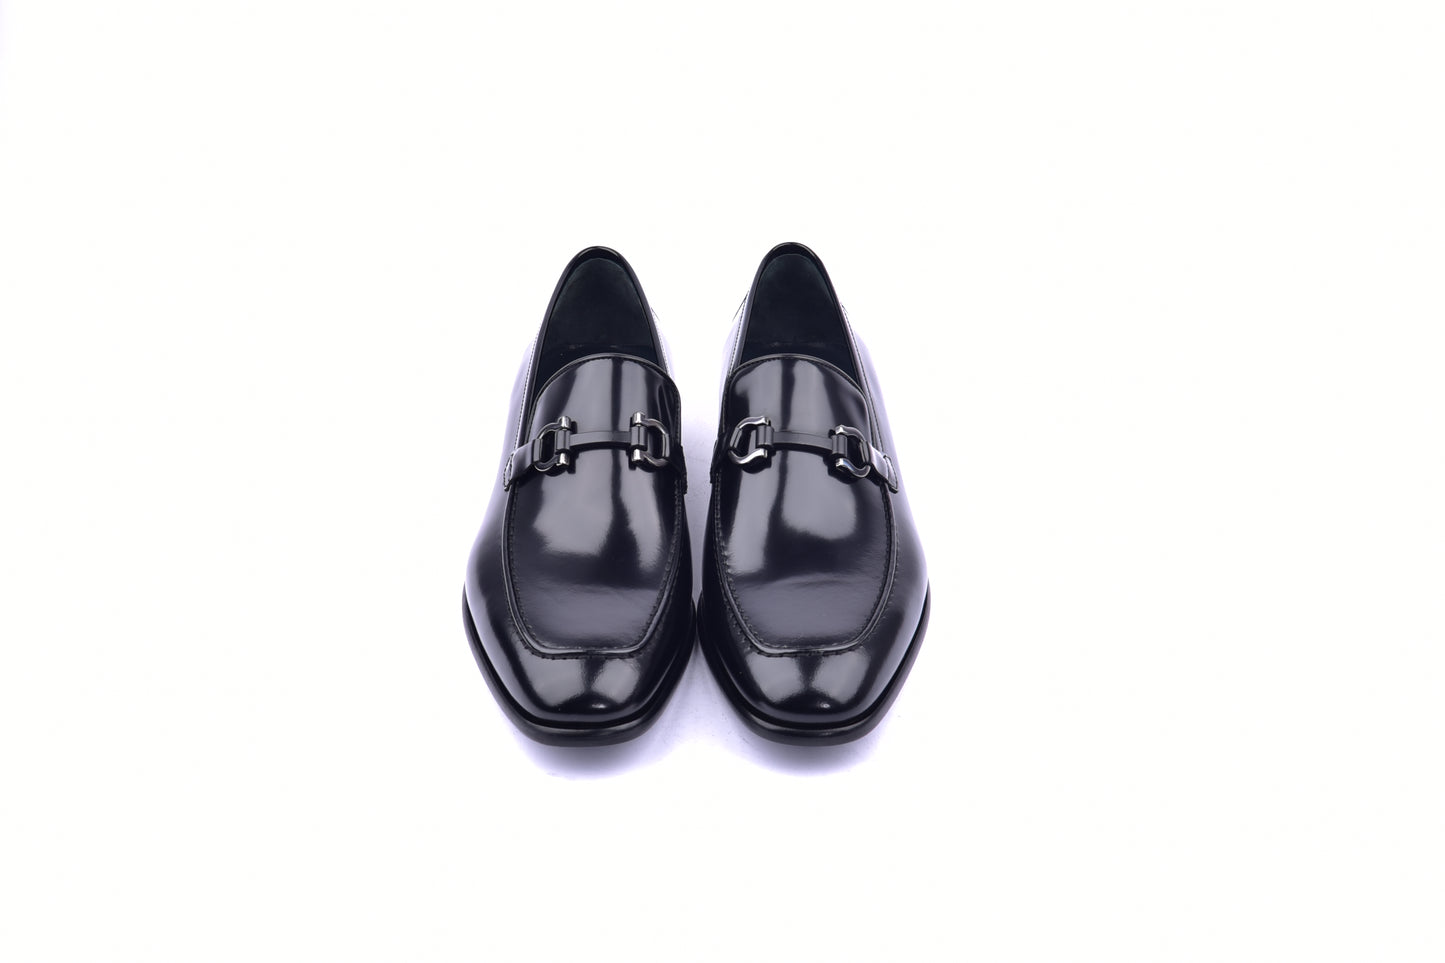 C043-6415 Lux Calf Buckle Loafer- Black